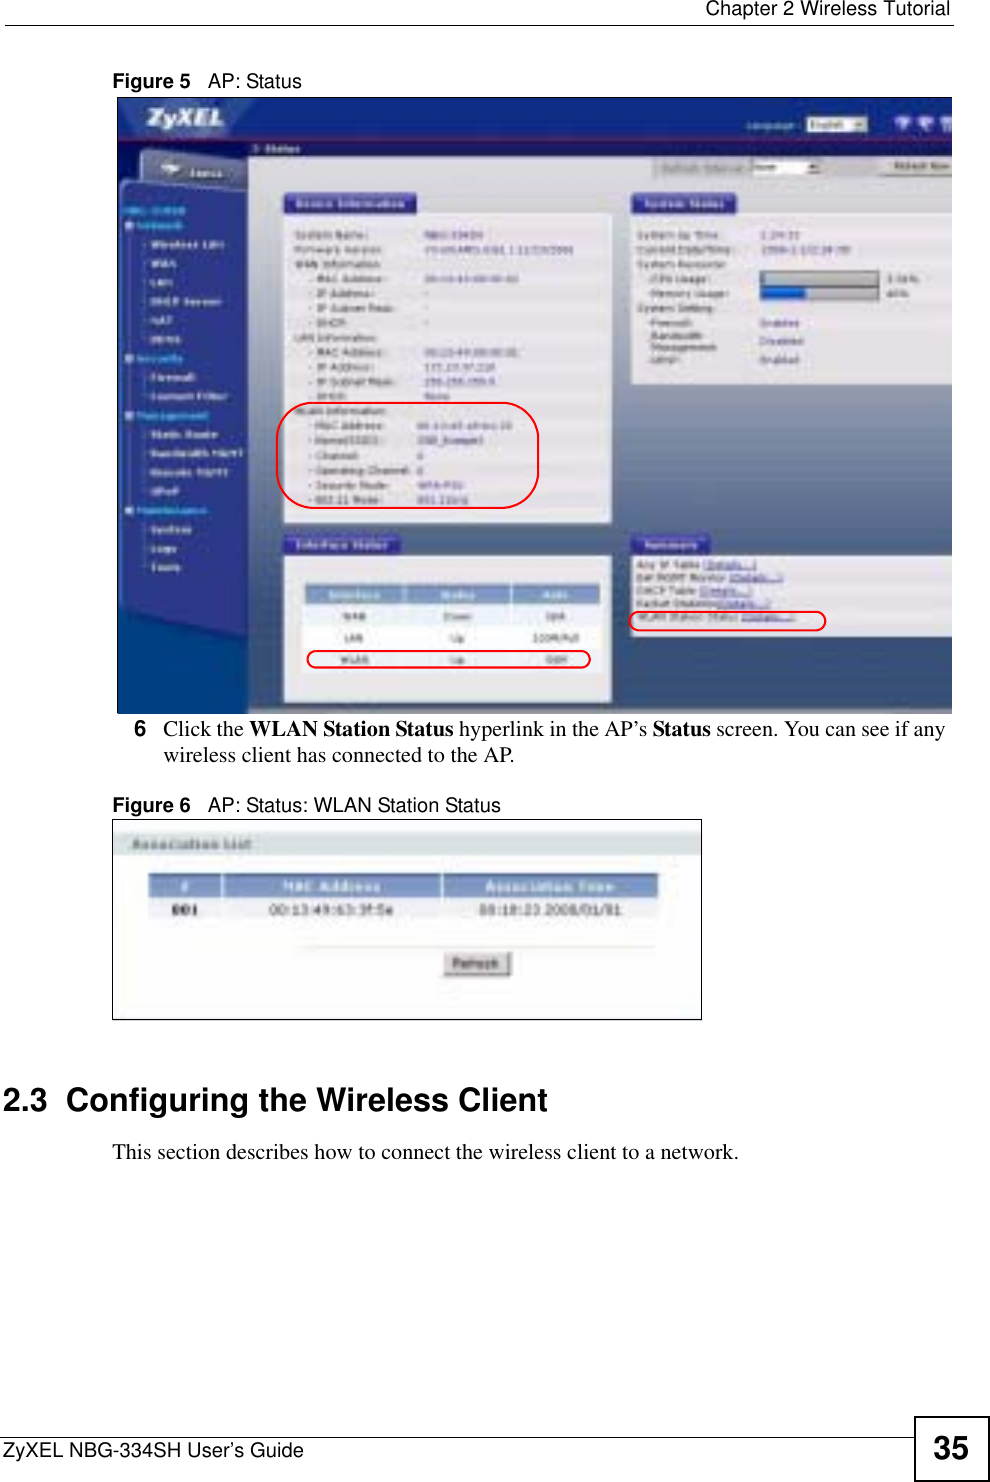  Chapter 2 Wireless TutorialZyXEL NBG-334SH User’s Guide 35Figure 5   AP: Status6Click the WLAN Station Status hyperlink in the AP’s Status screen. You can see if any wireless client has connected to the AP.Figure 6   AP: Status: WLAN Station Status2.3  Configuring the Wireless ClientThis section describes how to connect the wireless client to a network.